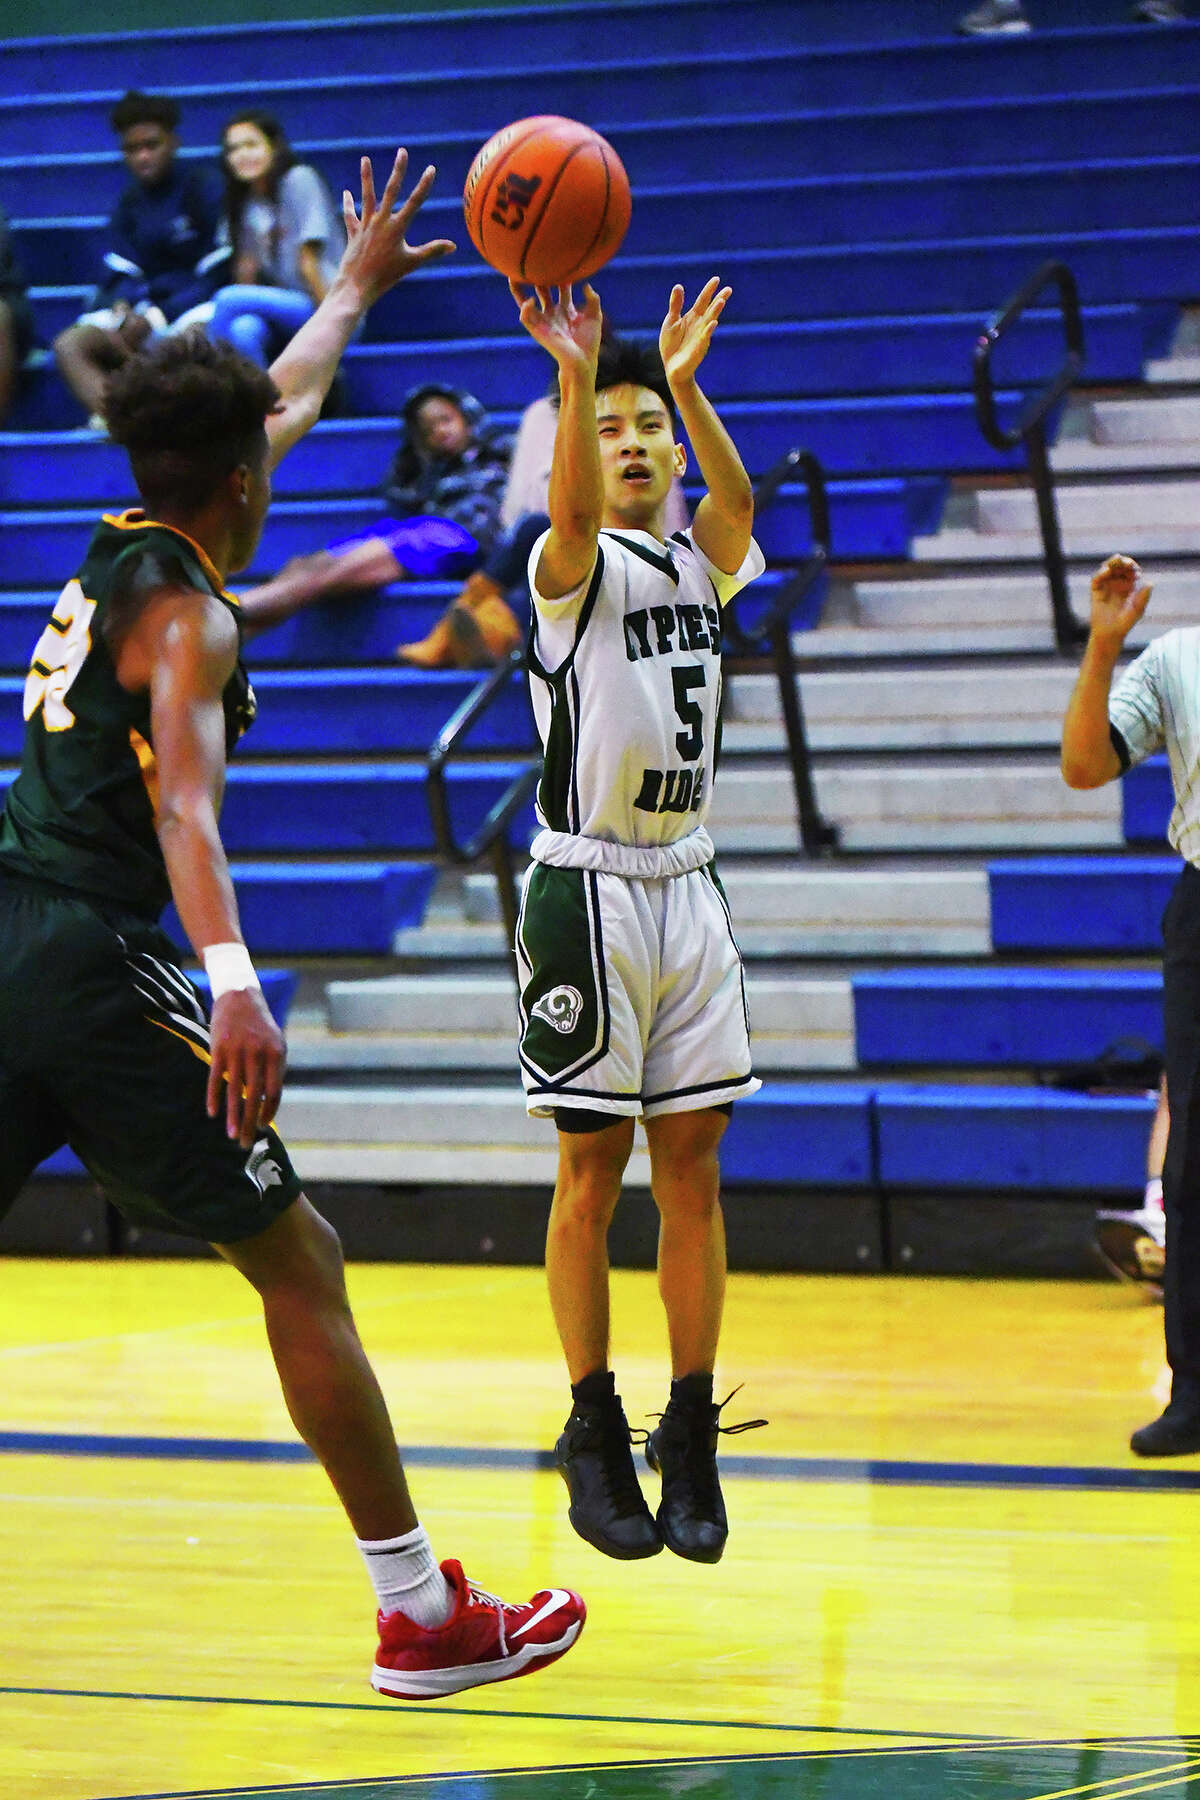 Cy Ridge senior guard Andre Tran puts up a shot from behind the arc Tuesday against Stratford. Though the Rams fell to the Spartans 102-78, Tran enjoyed a productive, effective day at the office, scoring 19 points and orchestrating the Cy Ridge offense.